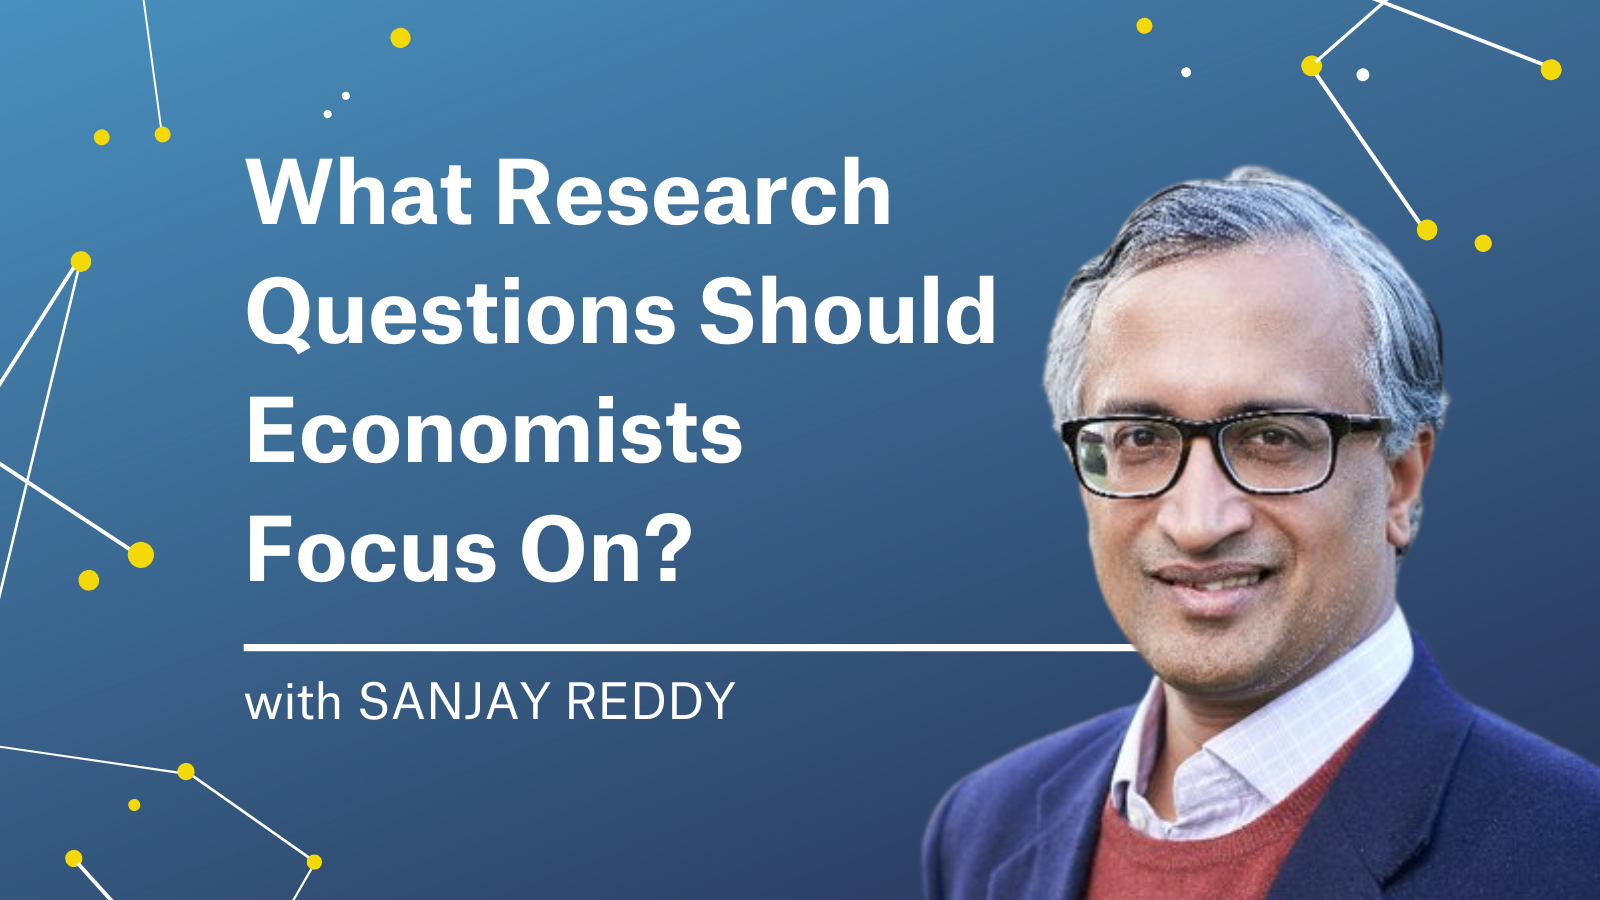 Sanjay Reddy | The Most Pertinent Questions for Economists to Answer